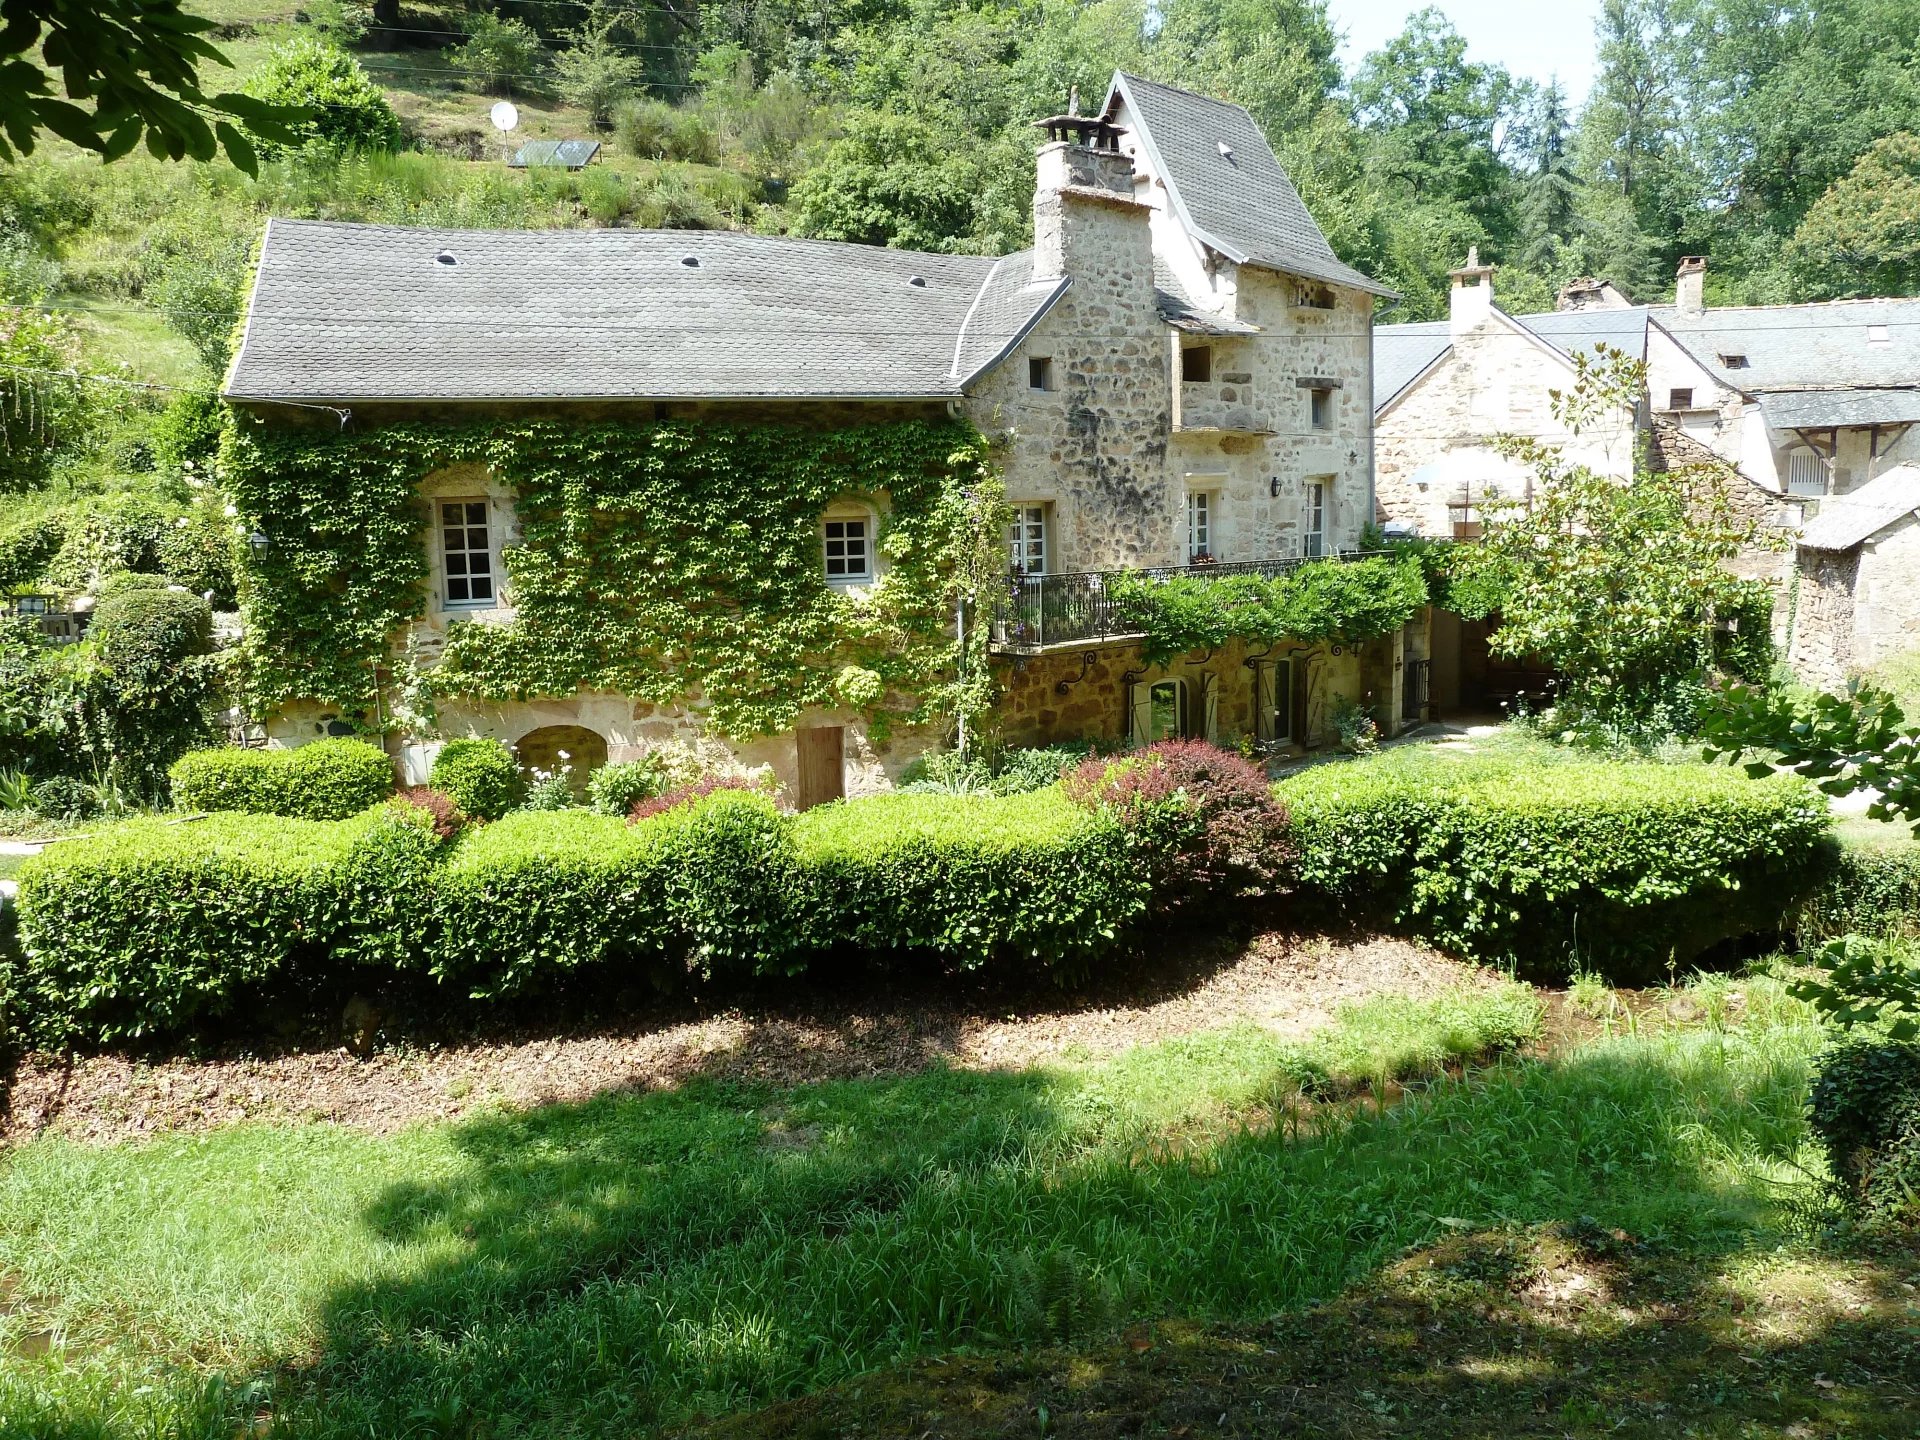 A beautifully restored country house in a hidden valley